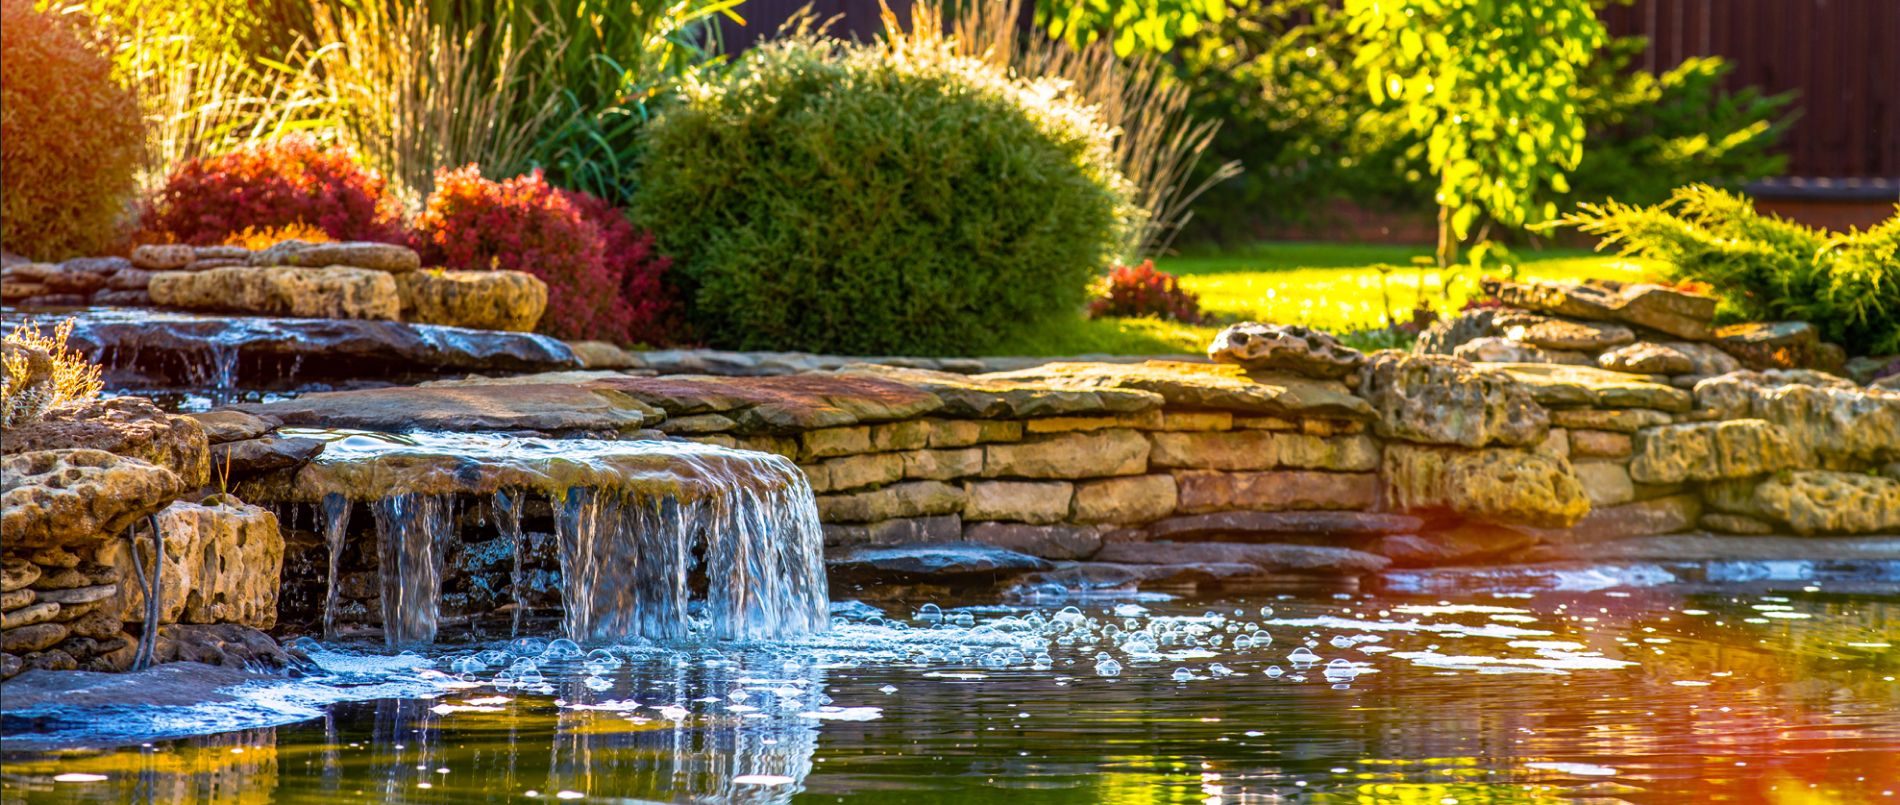 <h2>For everything you need to make an Eden of your own</h2><p>Choose from the largest range of garden water features and decorative landscaping products to inspire your garden design.</p><button>Shop Online</button>